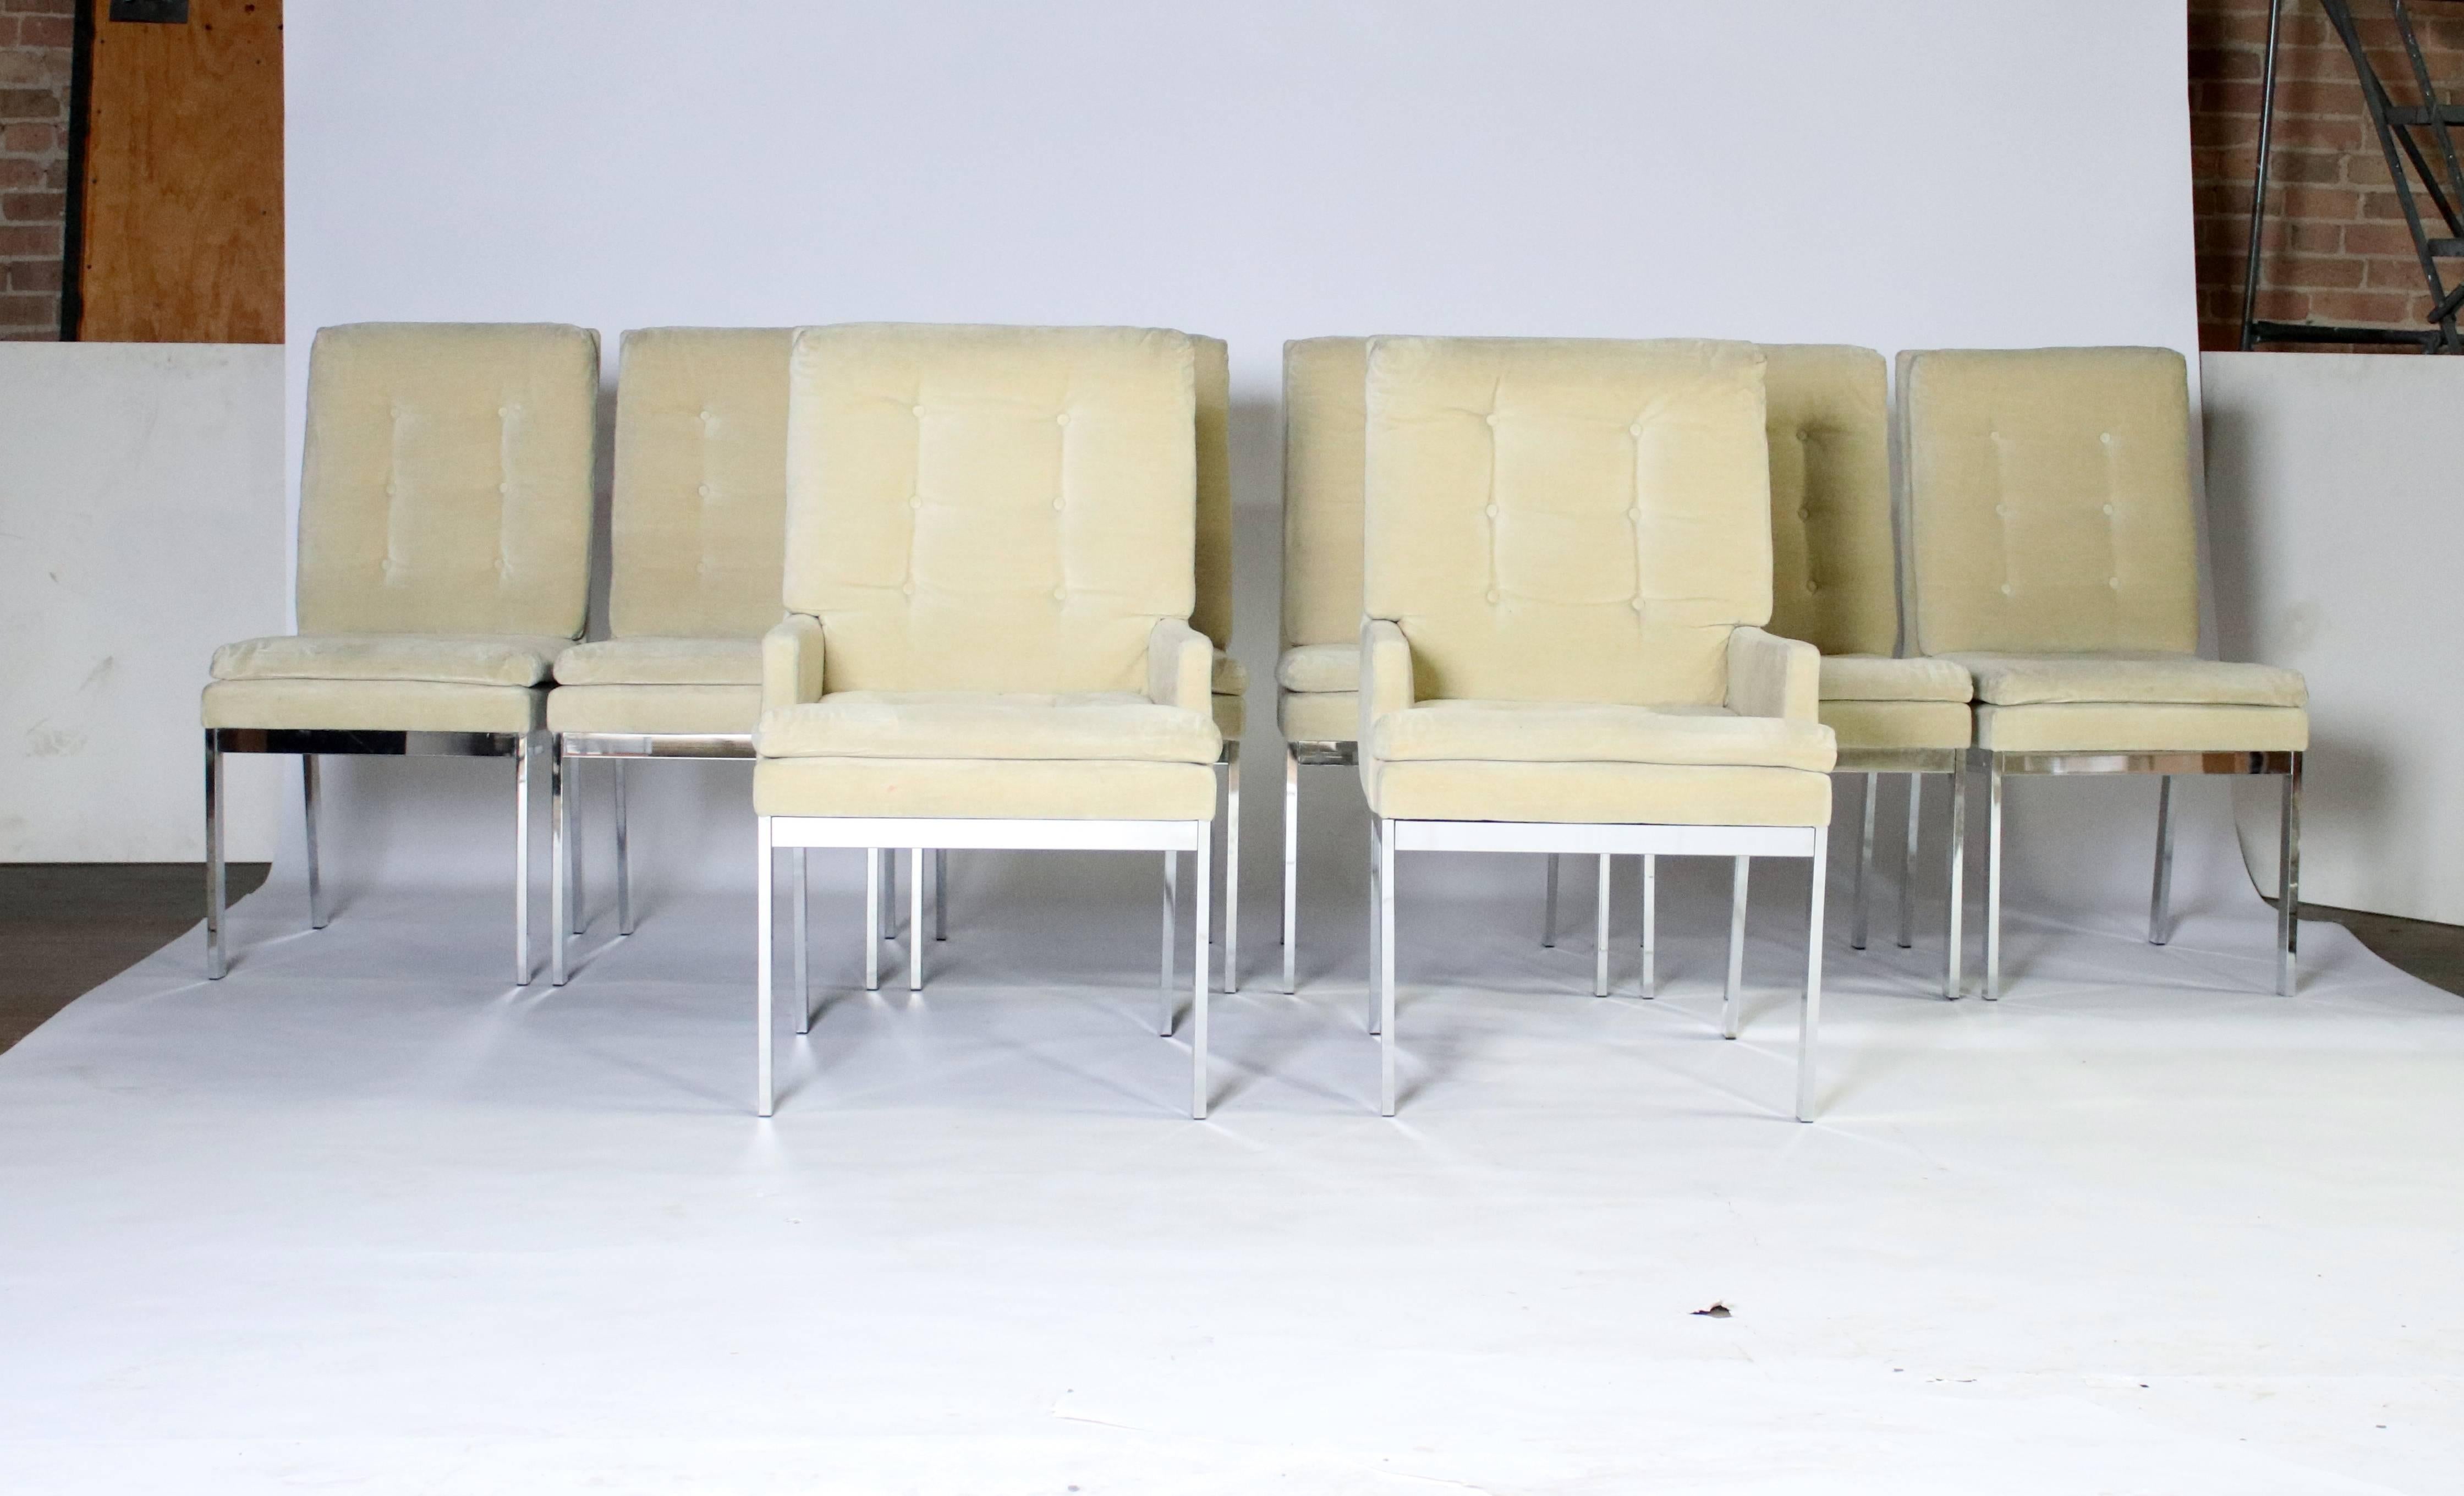 1970s chrome frame dining chairs with champagne color tufted upholstery. Very clean chrome and fabric with very little signs of age. All rubber glides intact and labels underneath the chair.
Set includes two armchairs and six side